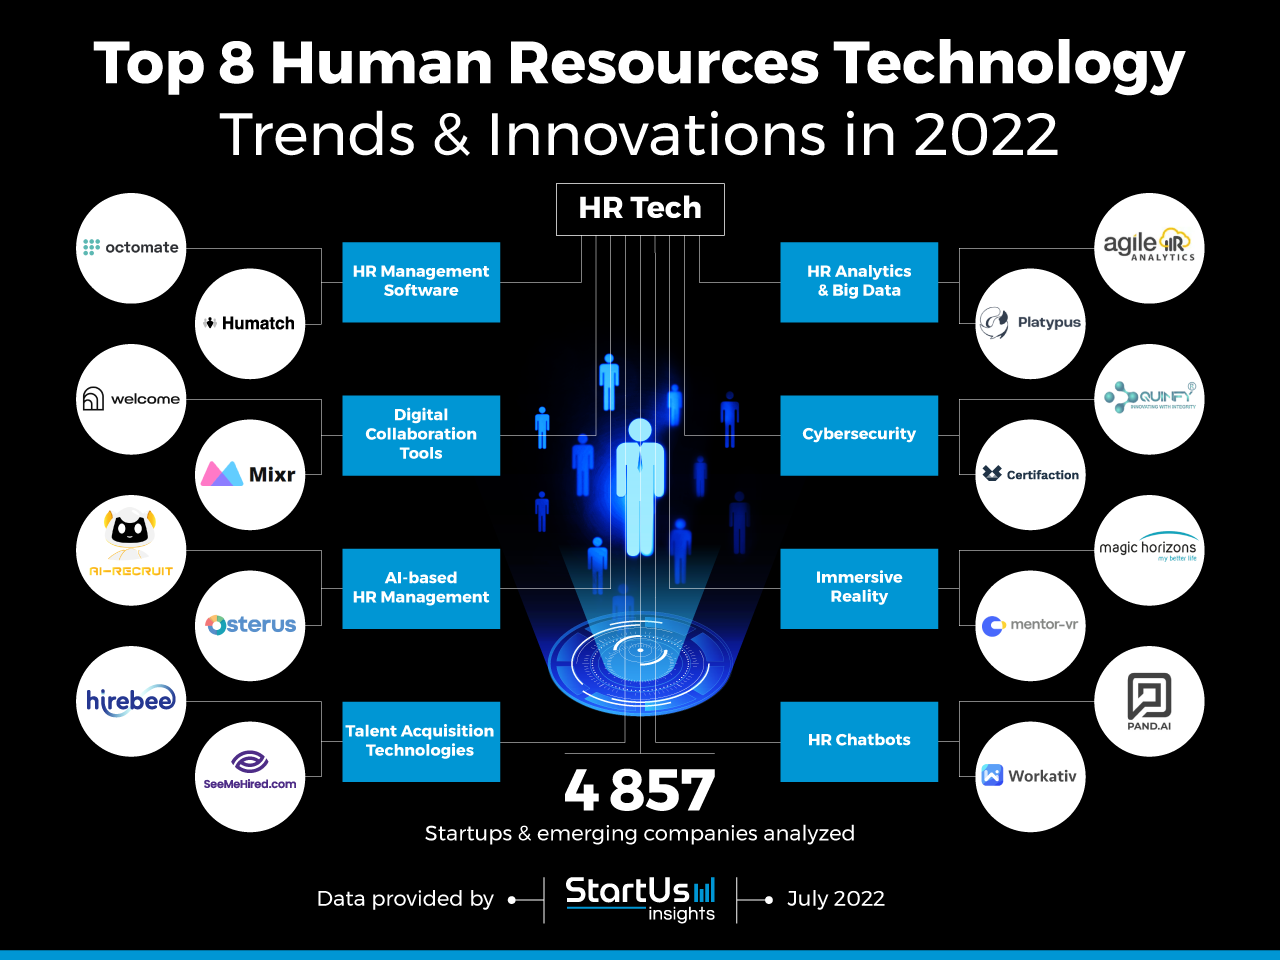 Top 8 Human Resources Technology Trends & Innovations in 2022